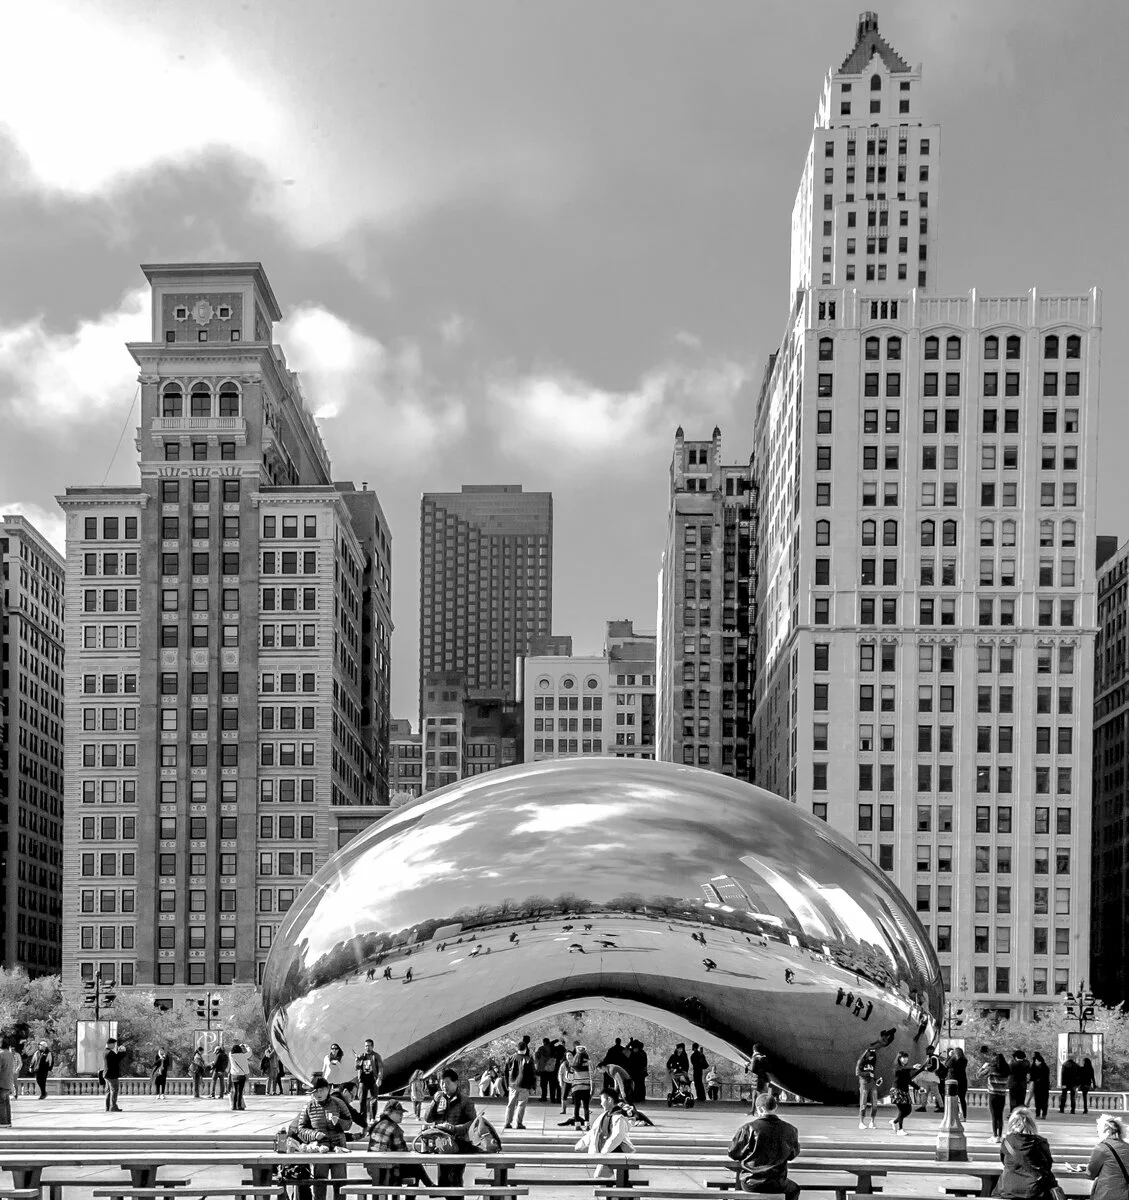 View of <em>Cloud Gate</em> (2006) by Anish Kapoor, Chicago, IL. Photo: Lee Bey. 2022/09/Cloud-Gate.jpg 